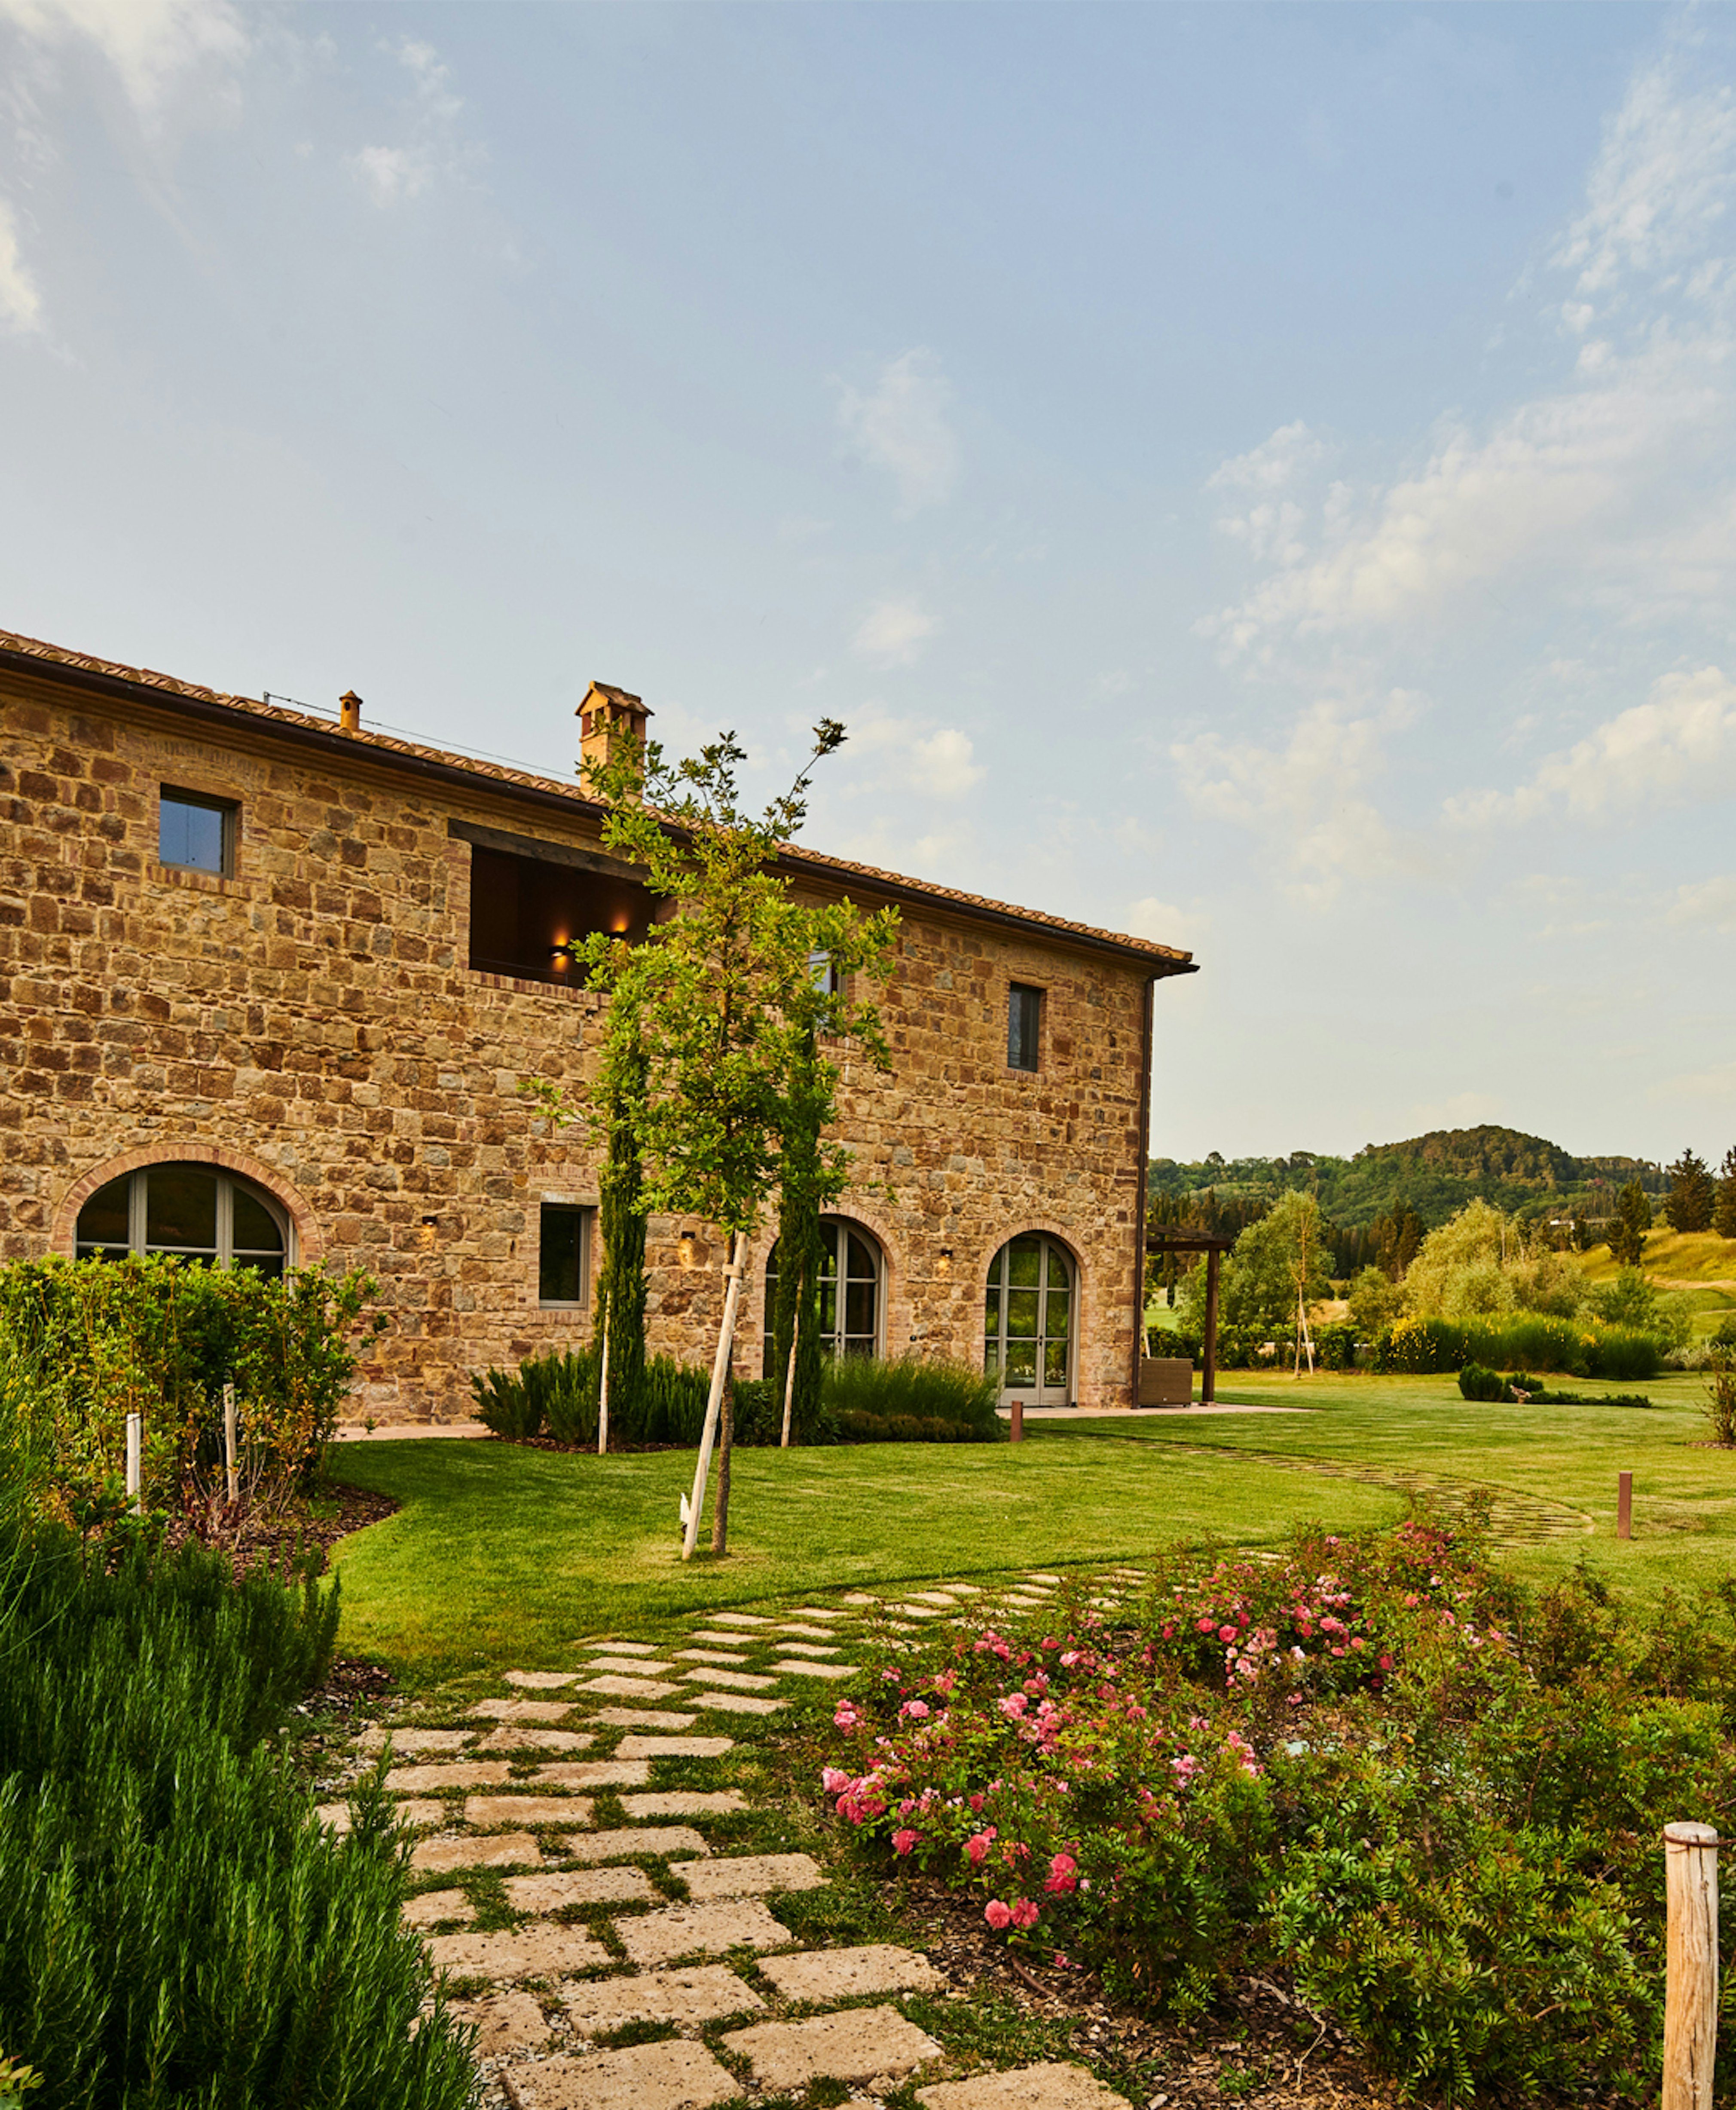 Luxury holiday villa in the heart of Tuscany with comforts of a 5-star resort